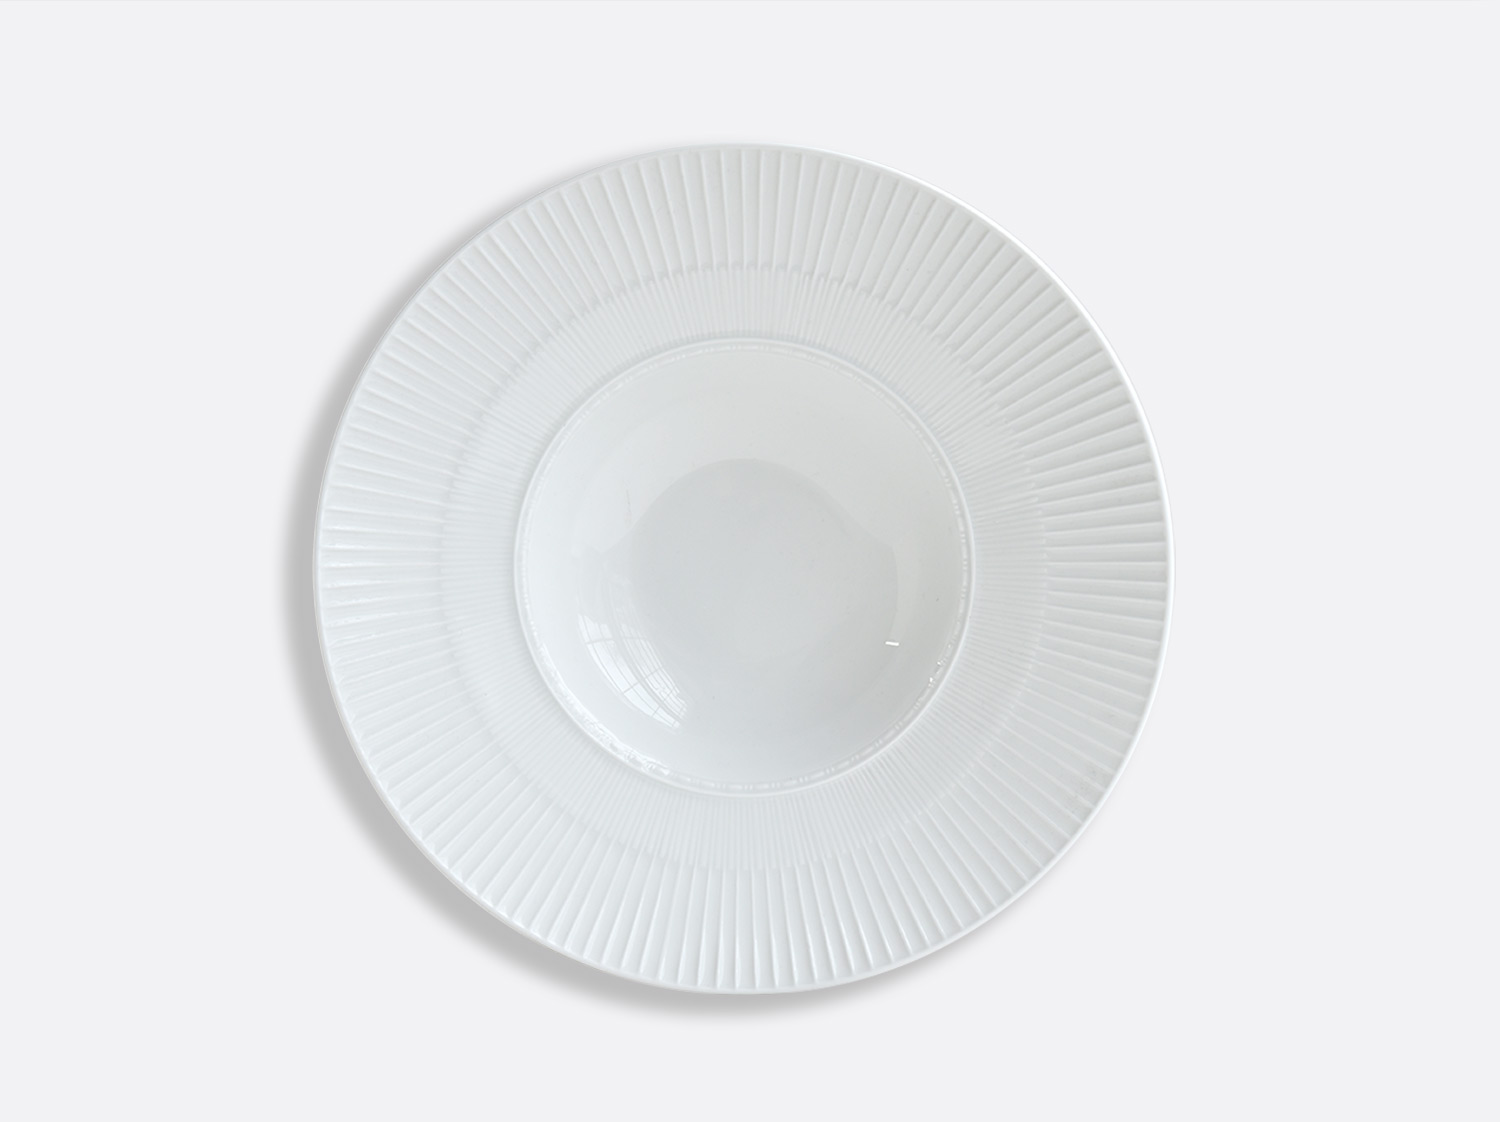 China Marly large rim soup 10.6" of the collection Louvre | Bernardaud